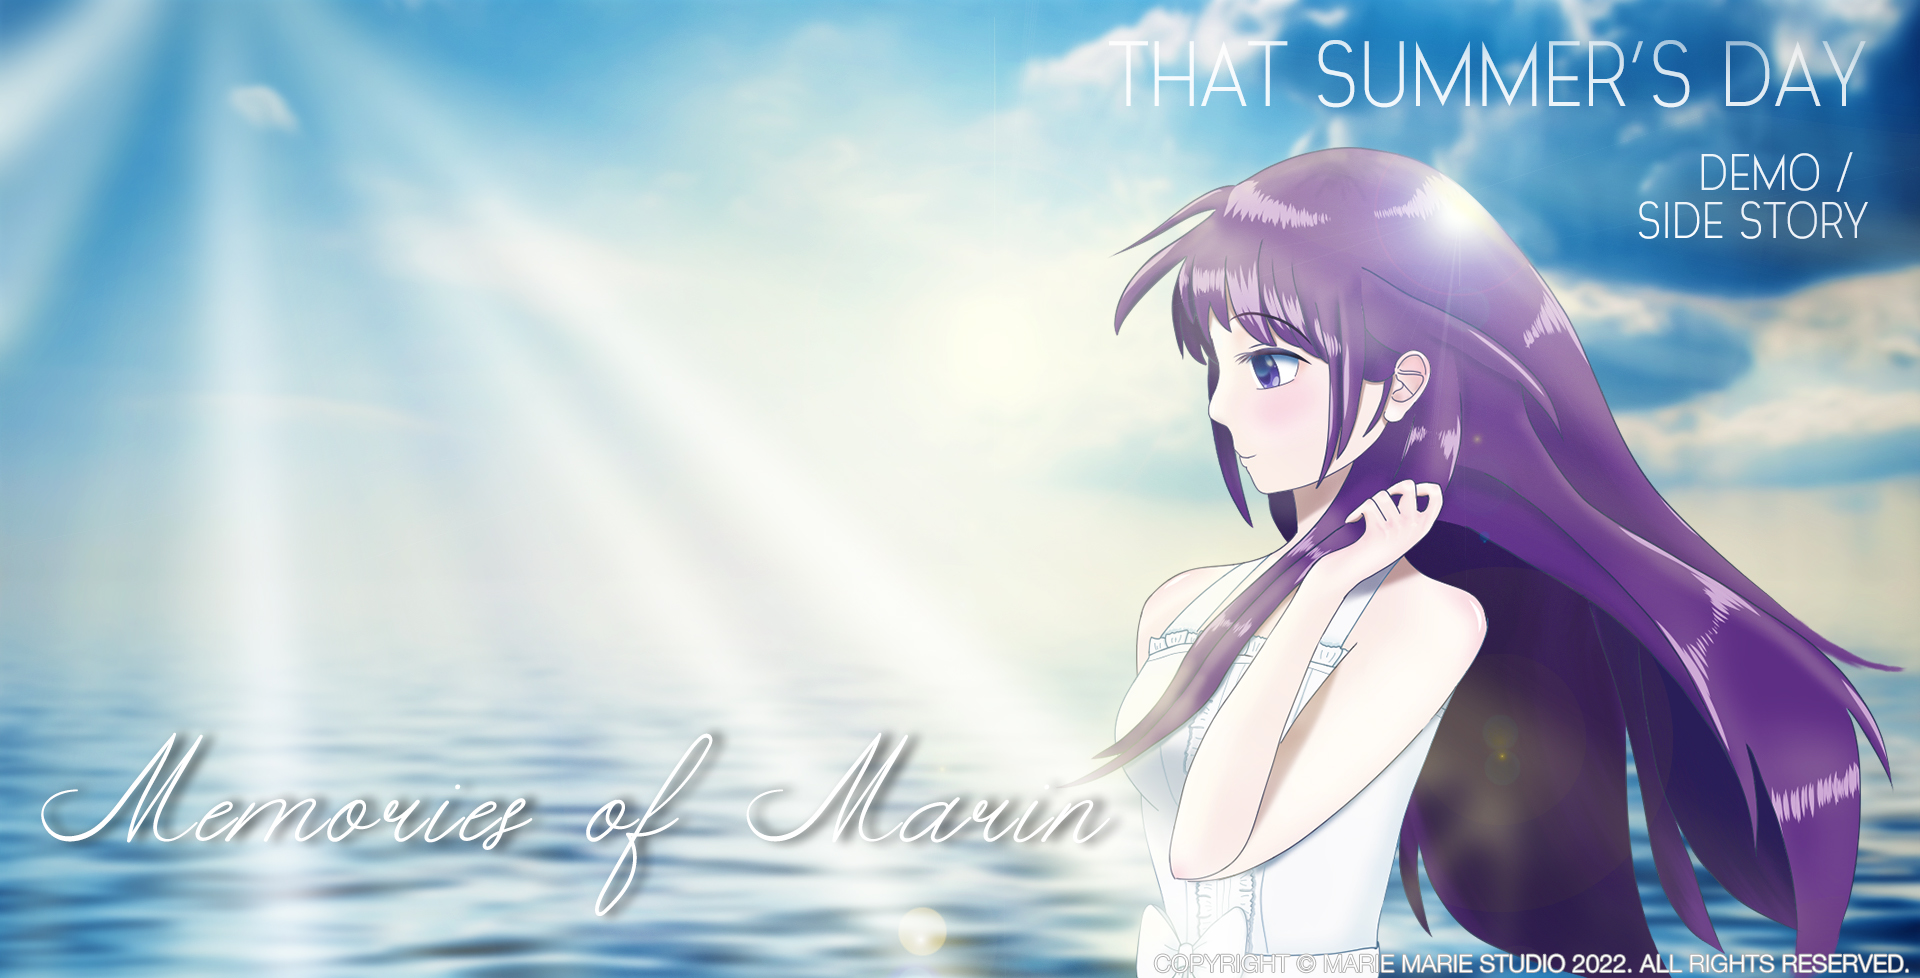 That Summer's Day - Memories of Marin